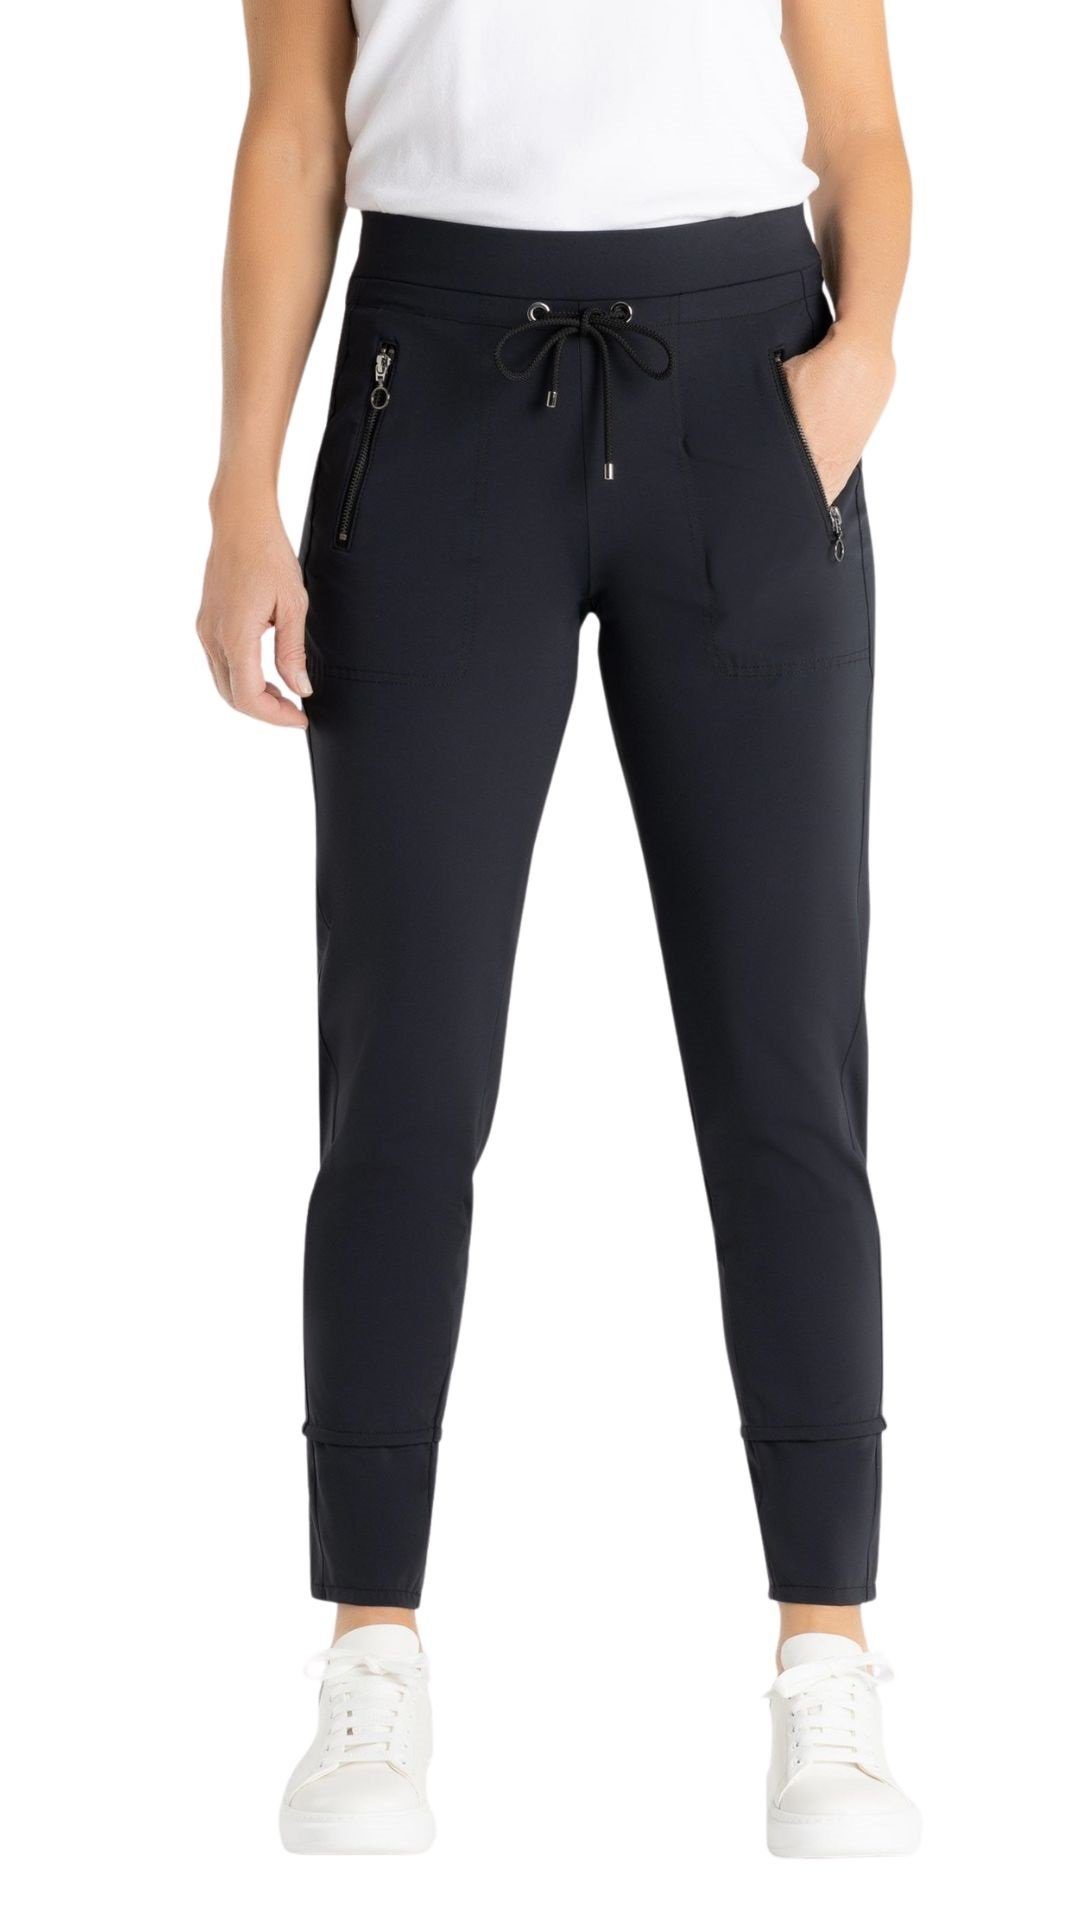 MAC Jogger Pants Easy Active Relaxed Fit mit Tunnelzug aus leichtem Techno Stretch black